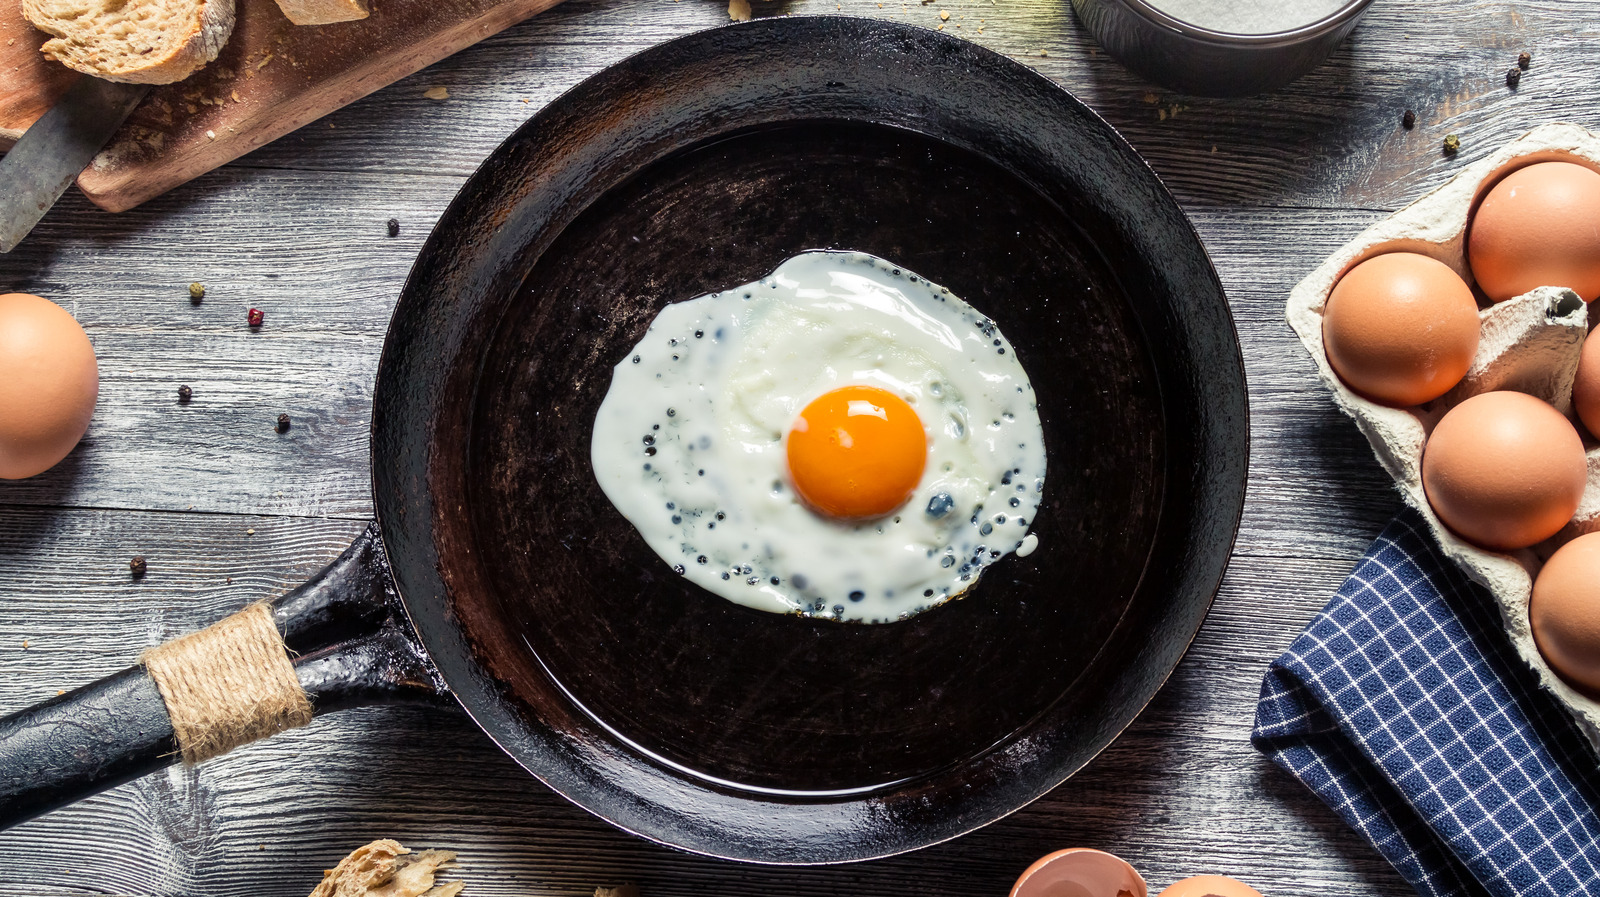 https://www.tastingtable.com/img/gallery/what-makes-sunny-side-up-eggs-different-from-over-easy/l-intro-1674070267.jpg